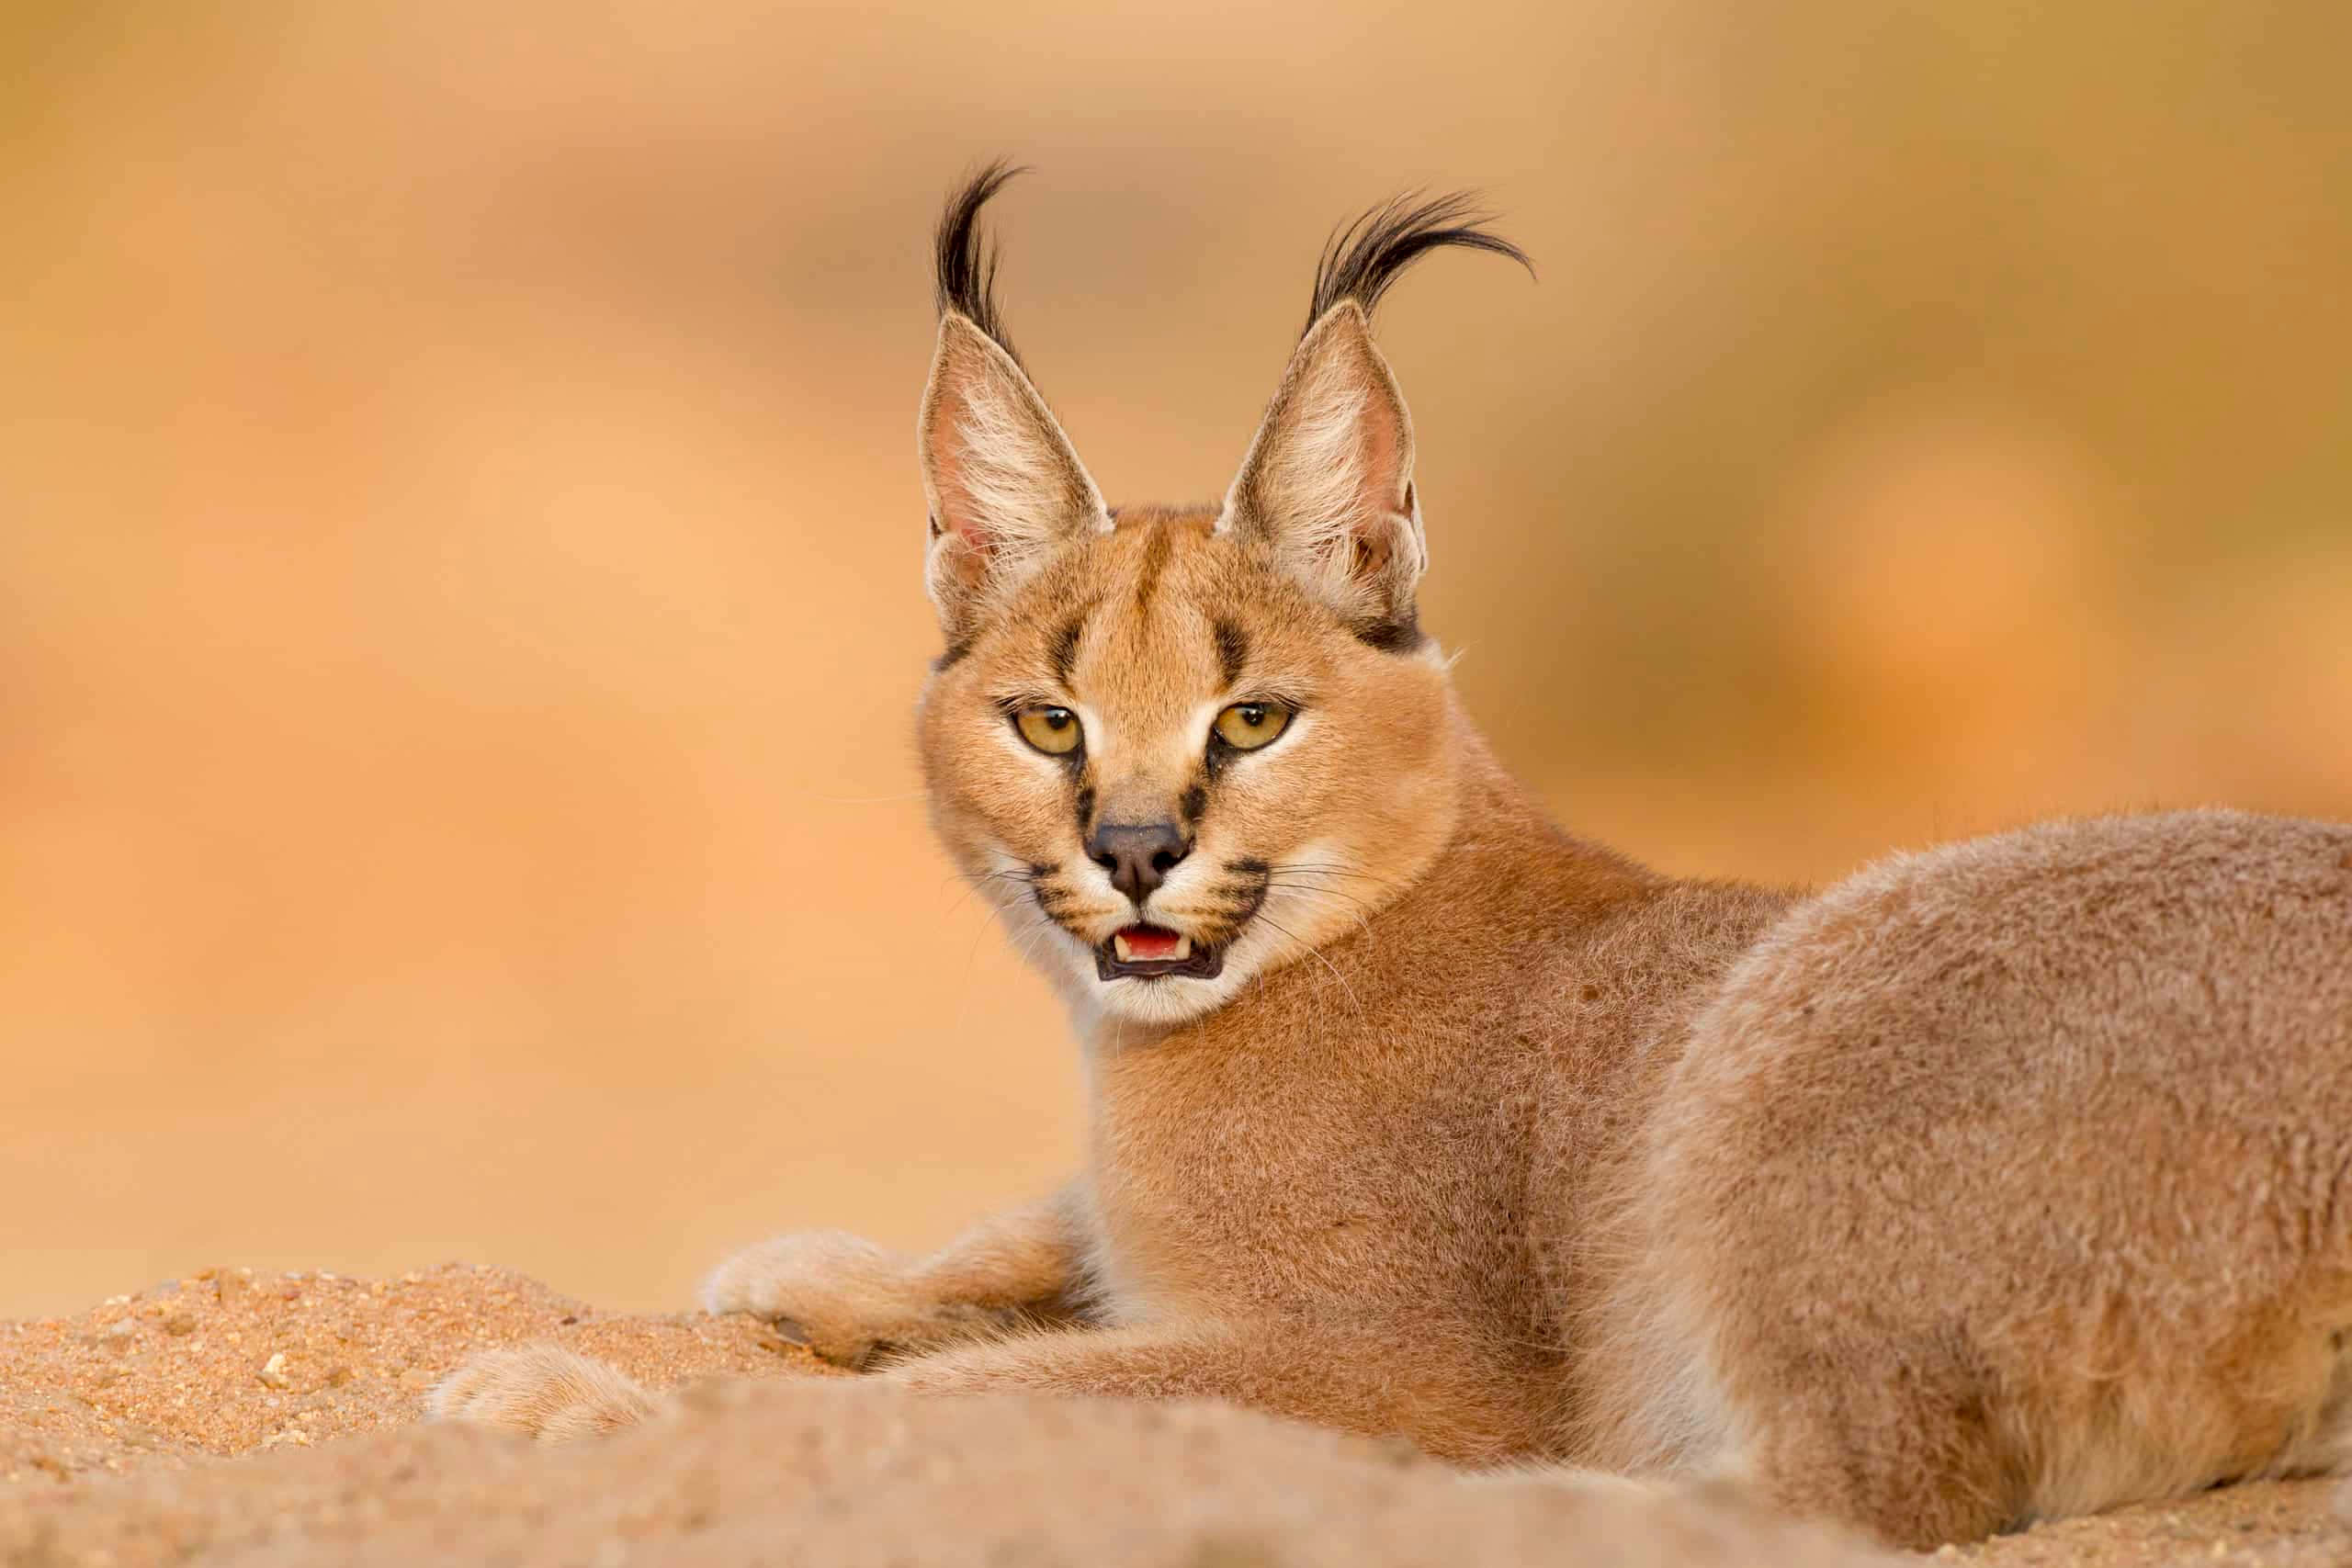 Caption: Majestic Caracal In The Wild Wallpaper